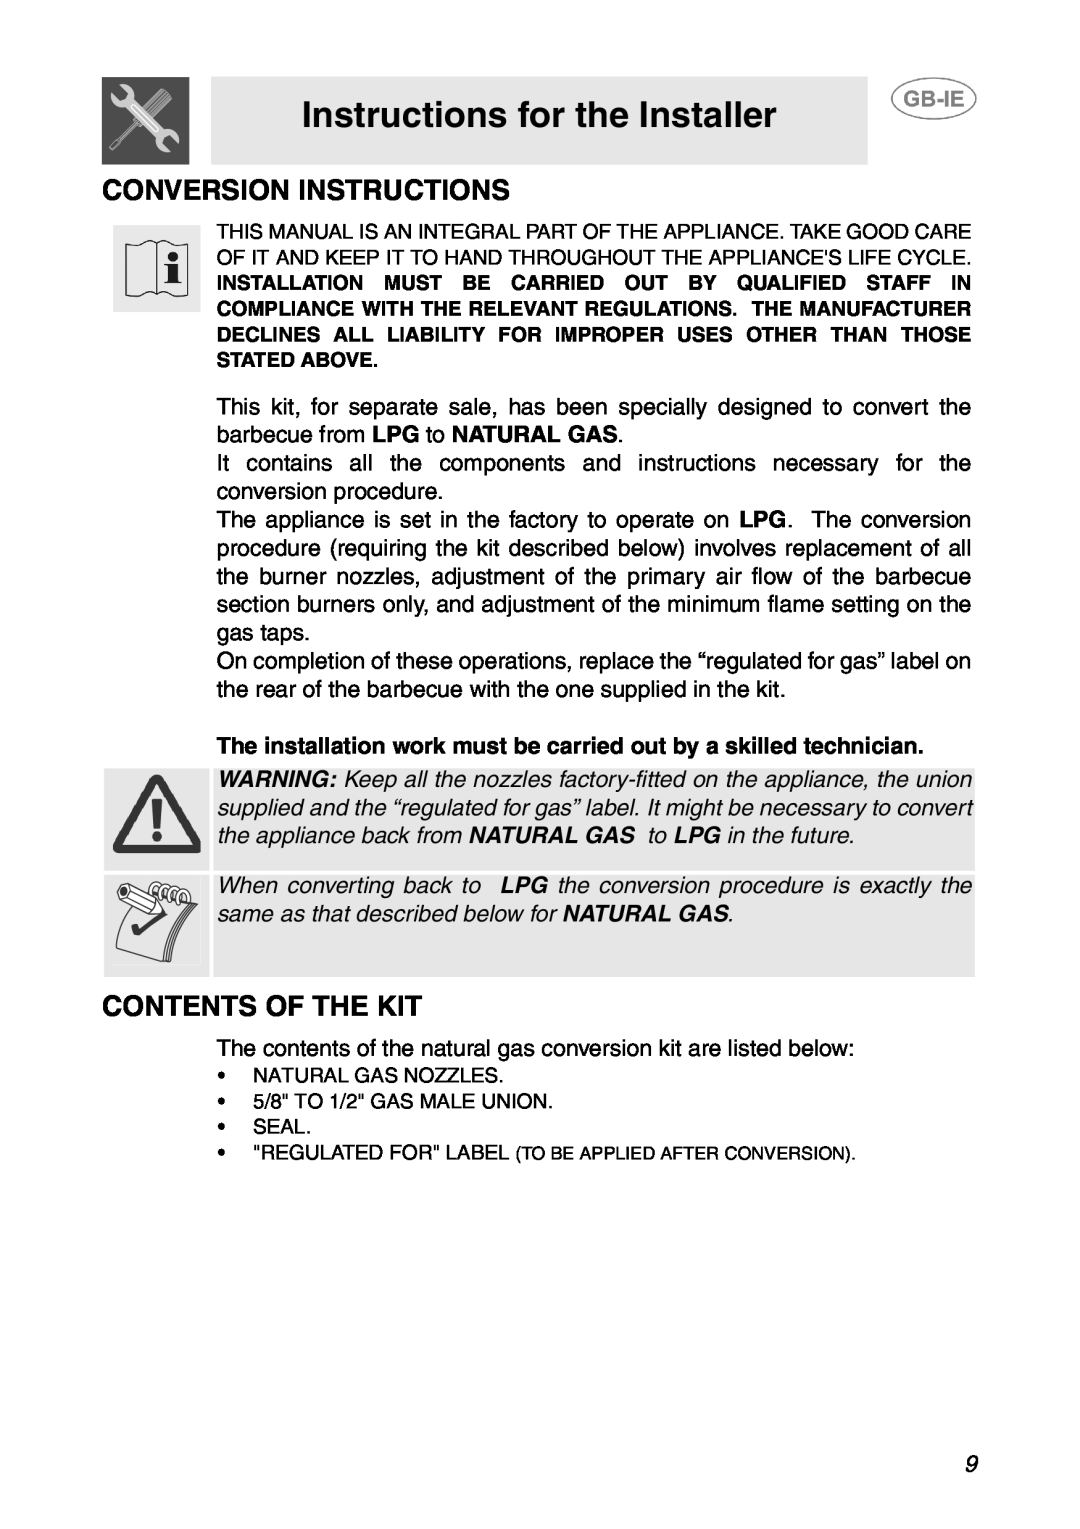 Smeg BQ6030 manual Instructions for the Installer, Conversion Instructions, Contents Of The Kit 